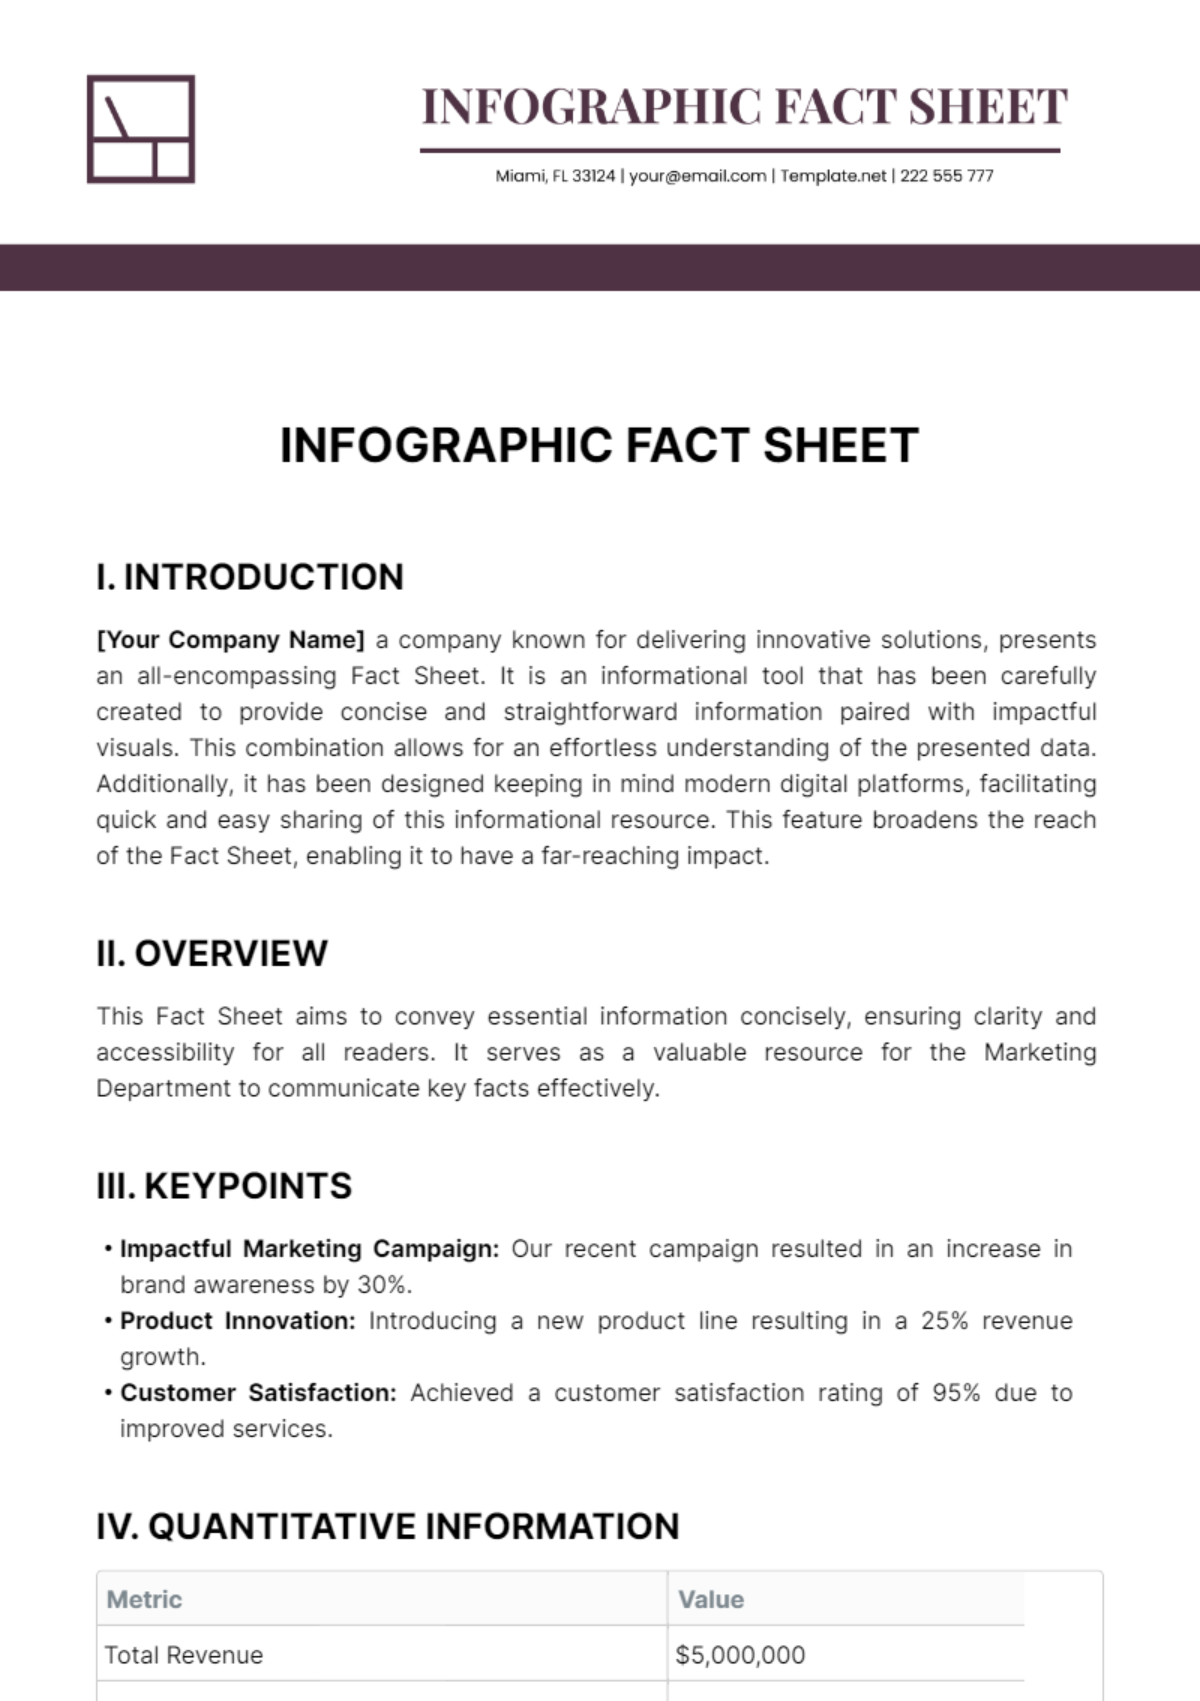 Free Infographic Fact Sheet Template